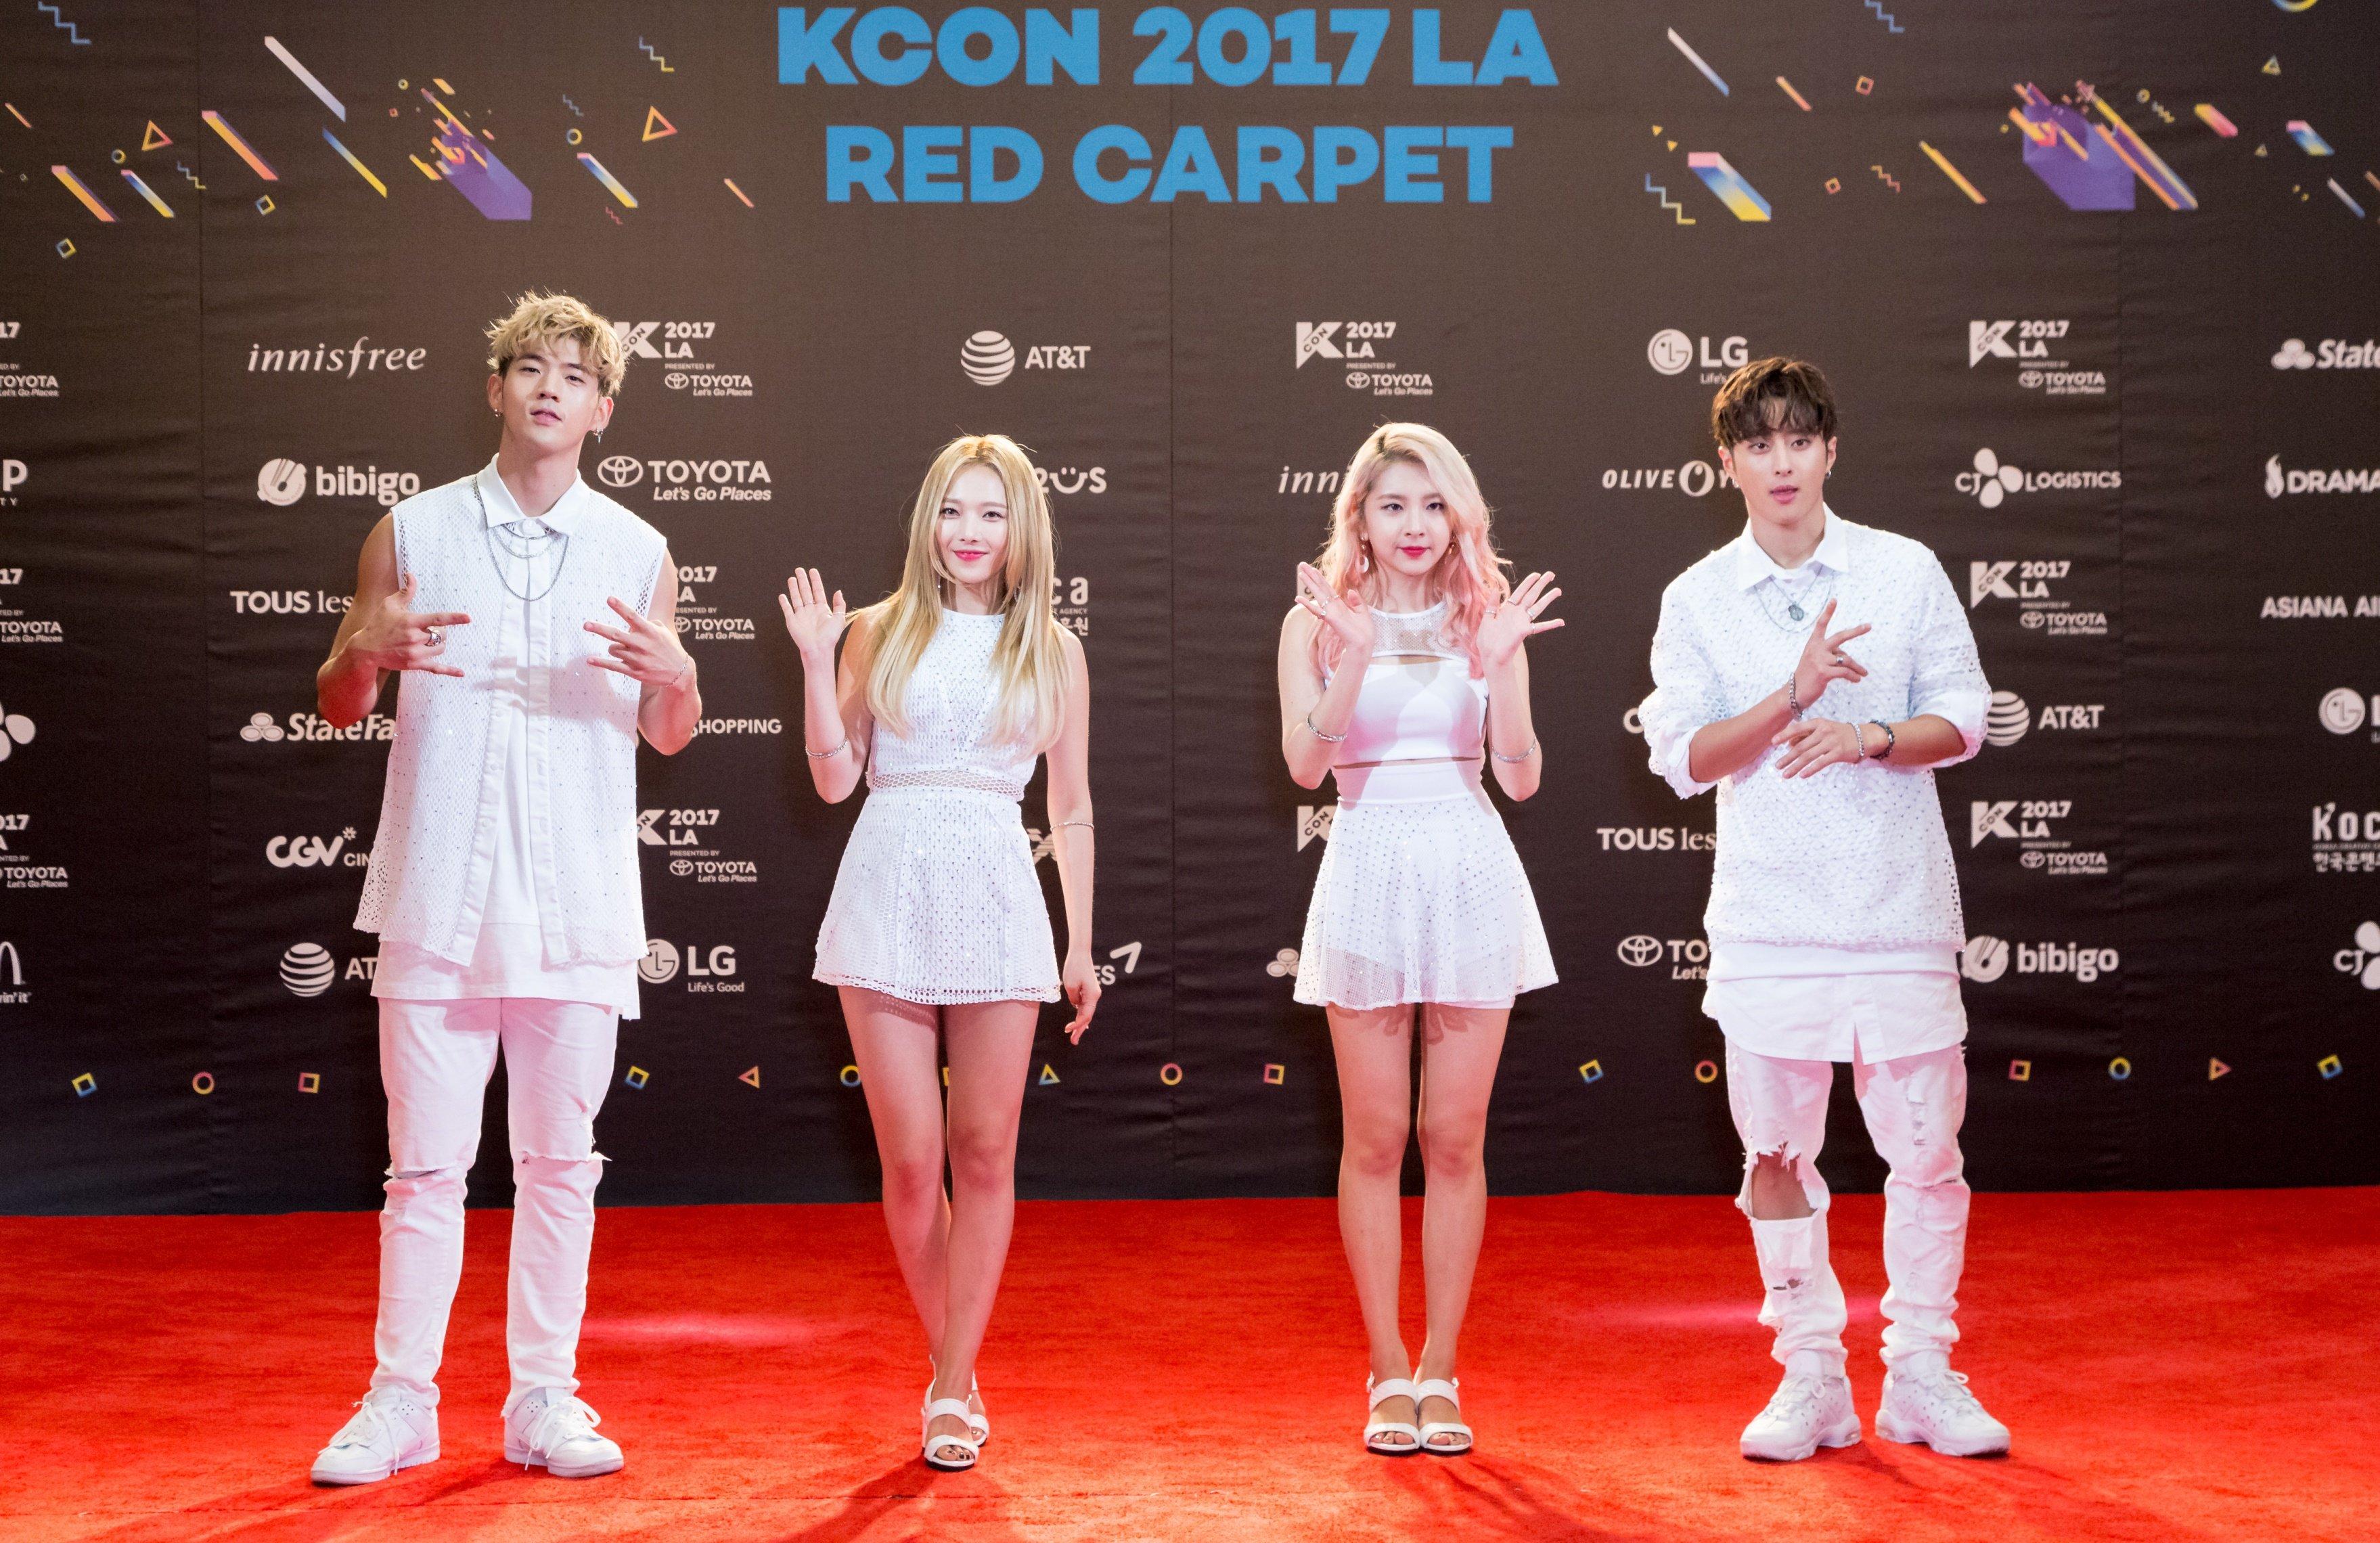 Kard photographed in 2017